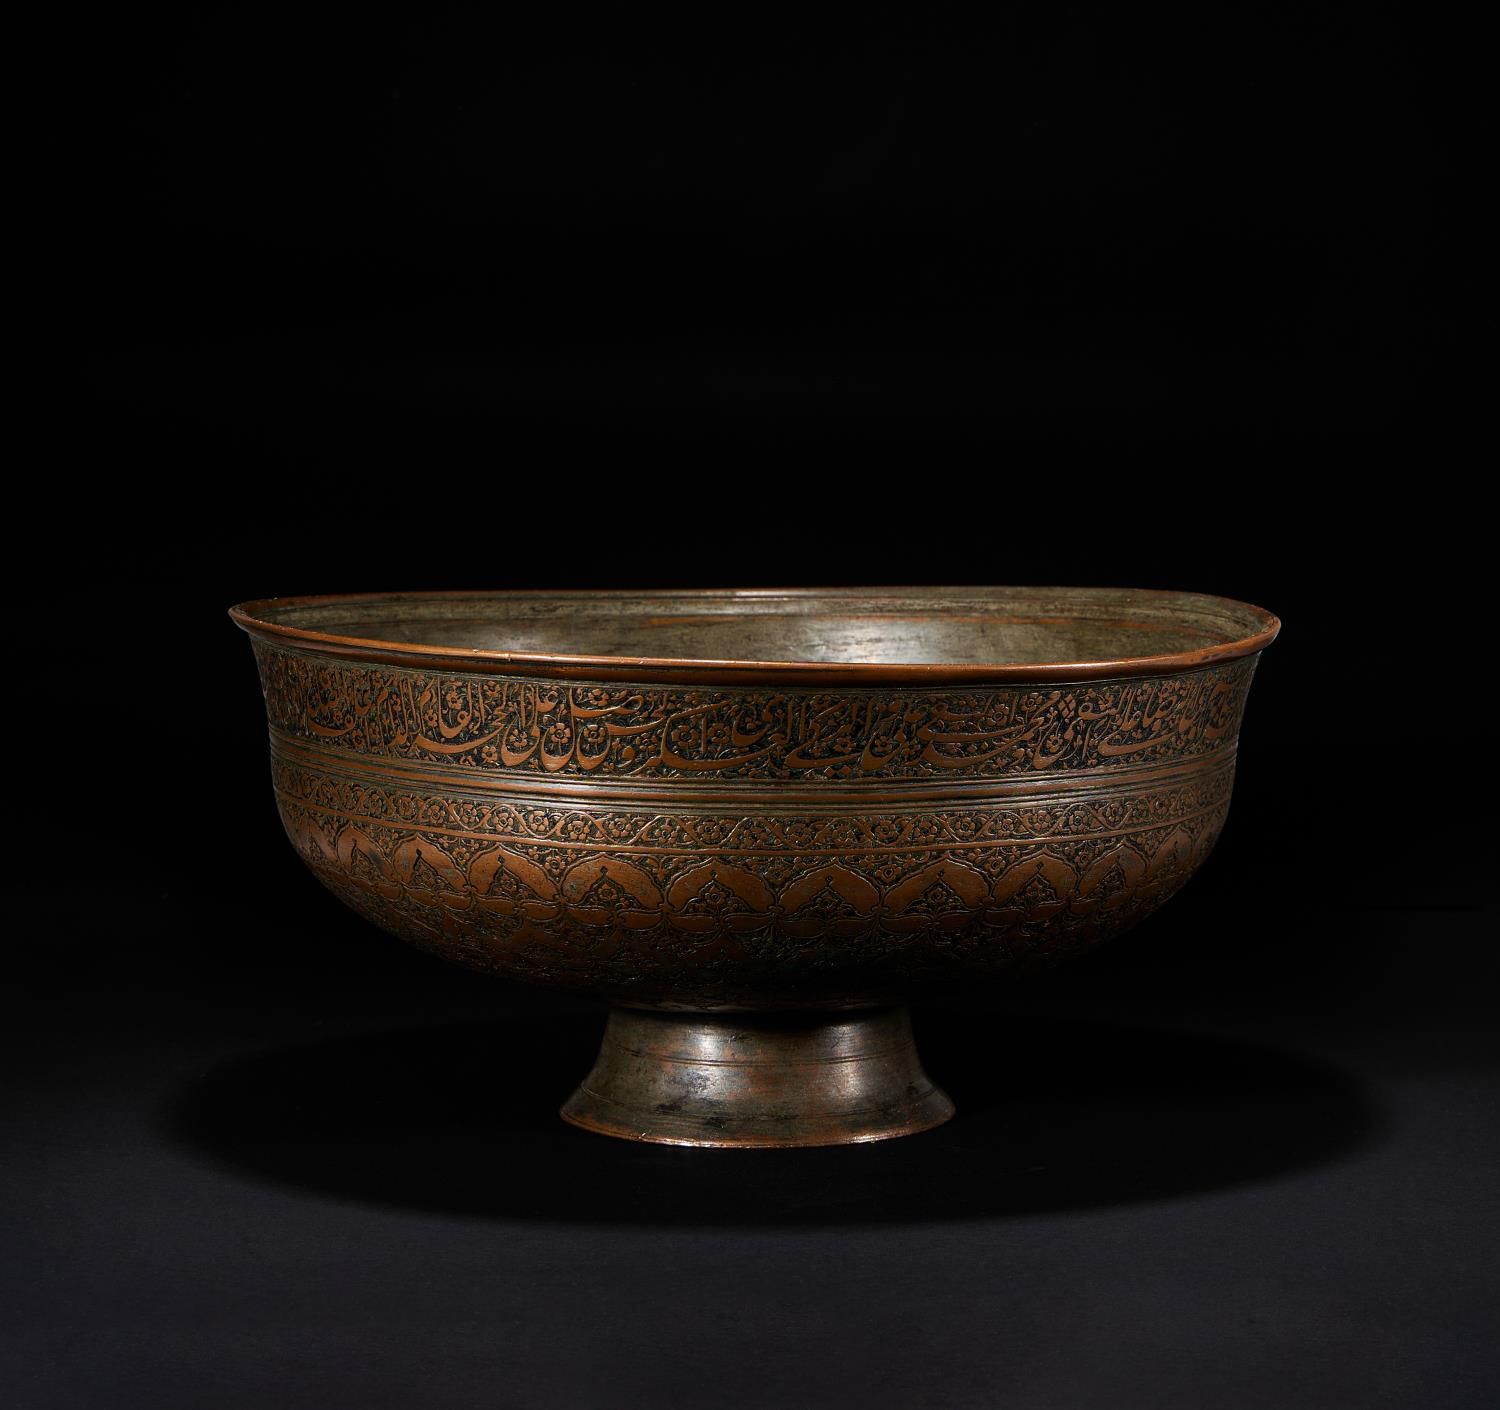 A SAFAVID TINNED COPPER BOWL, DATED 981AH/1573-74AD, PERSIA 沙法维镀锡铜碗，981AH/1573-7&hellip;